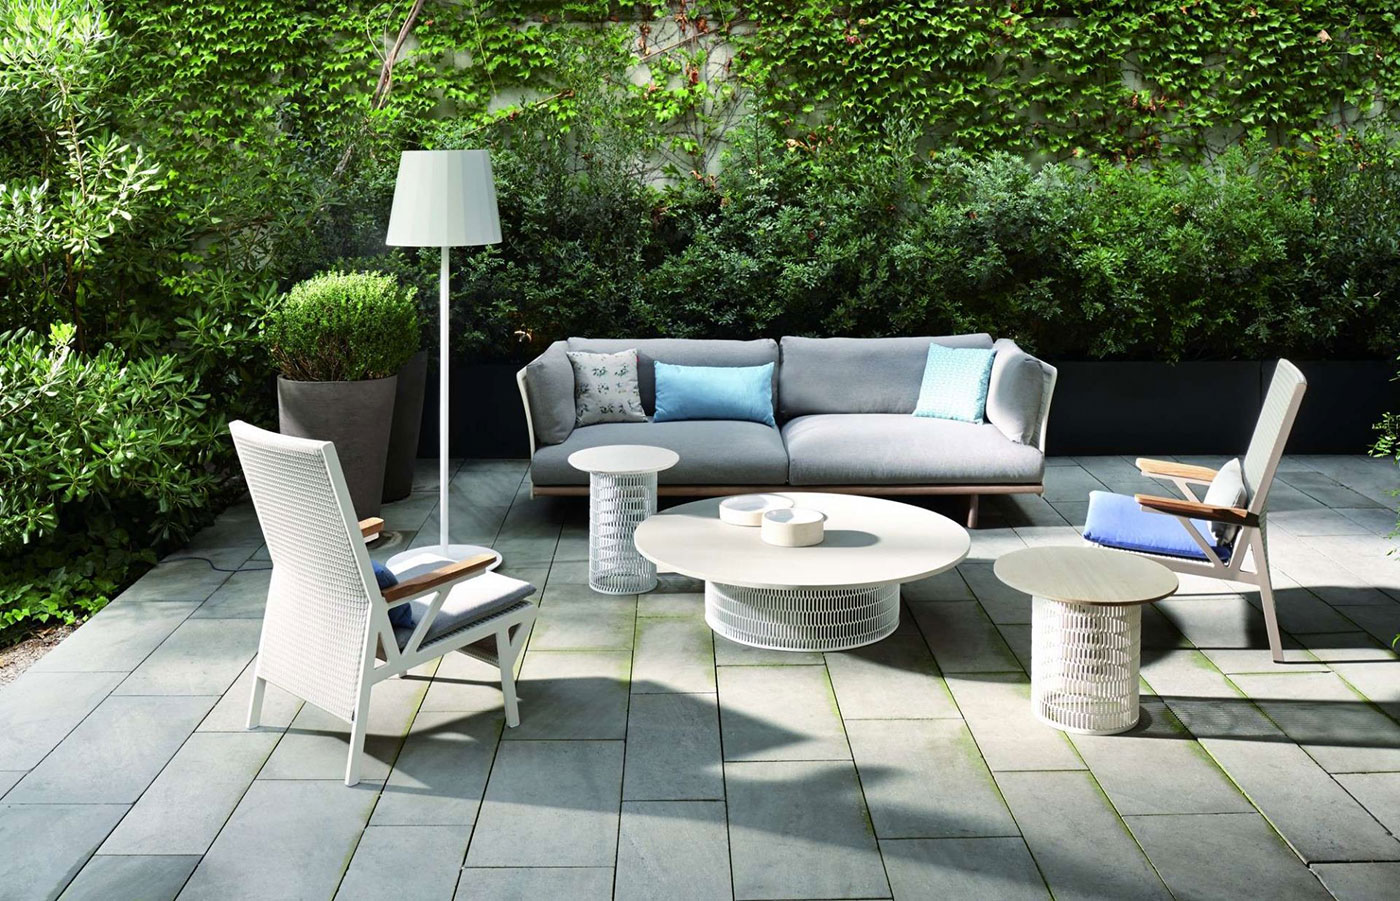 Obegi Home Outdoor Furniture Kettal Outdoor Collection 2